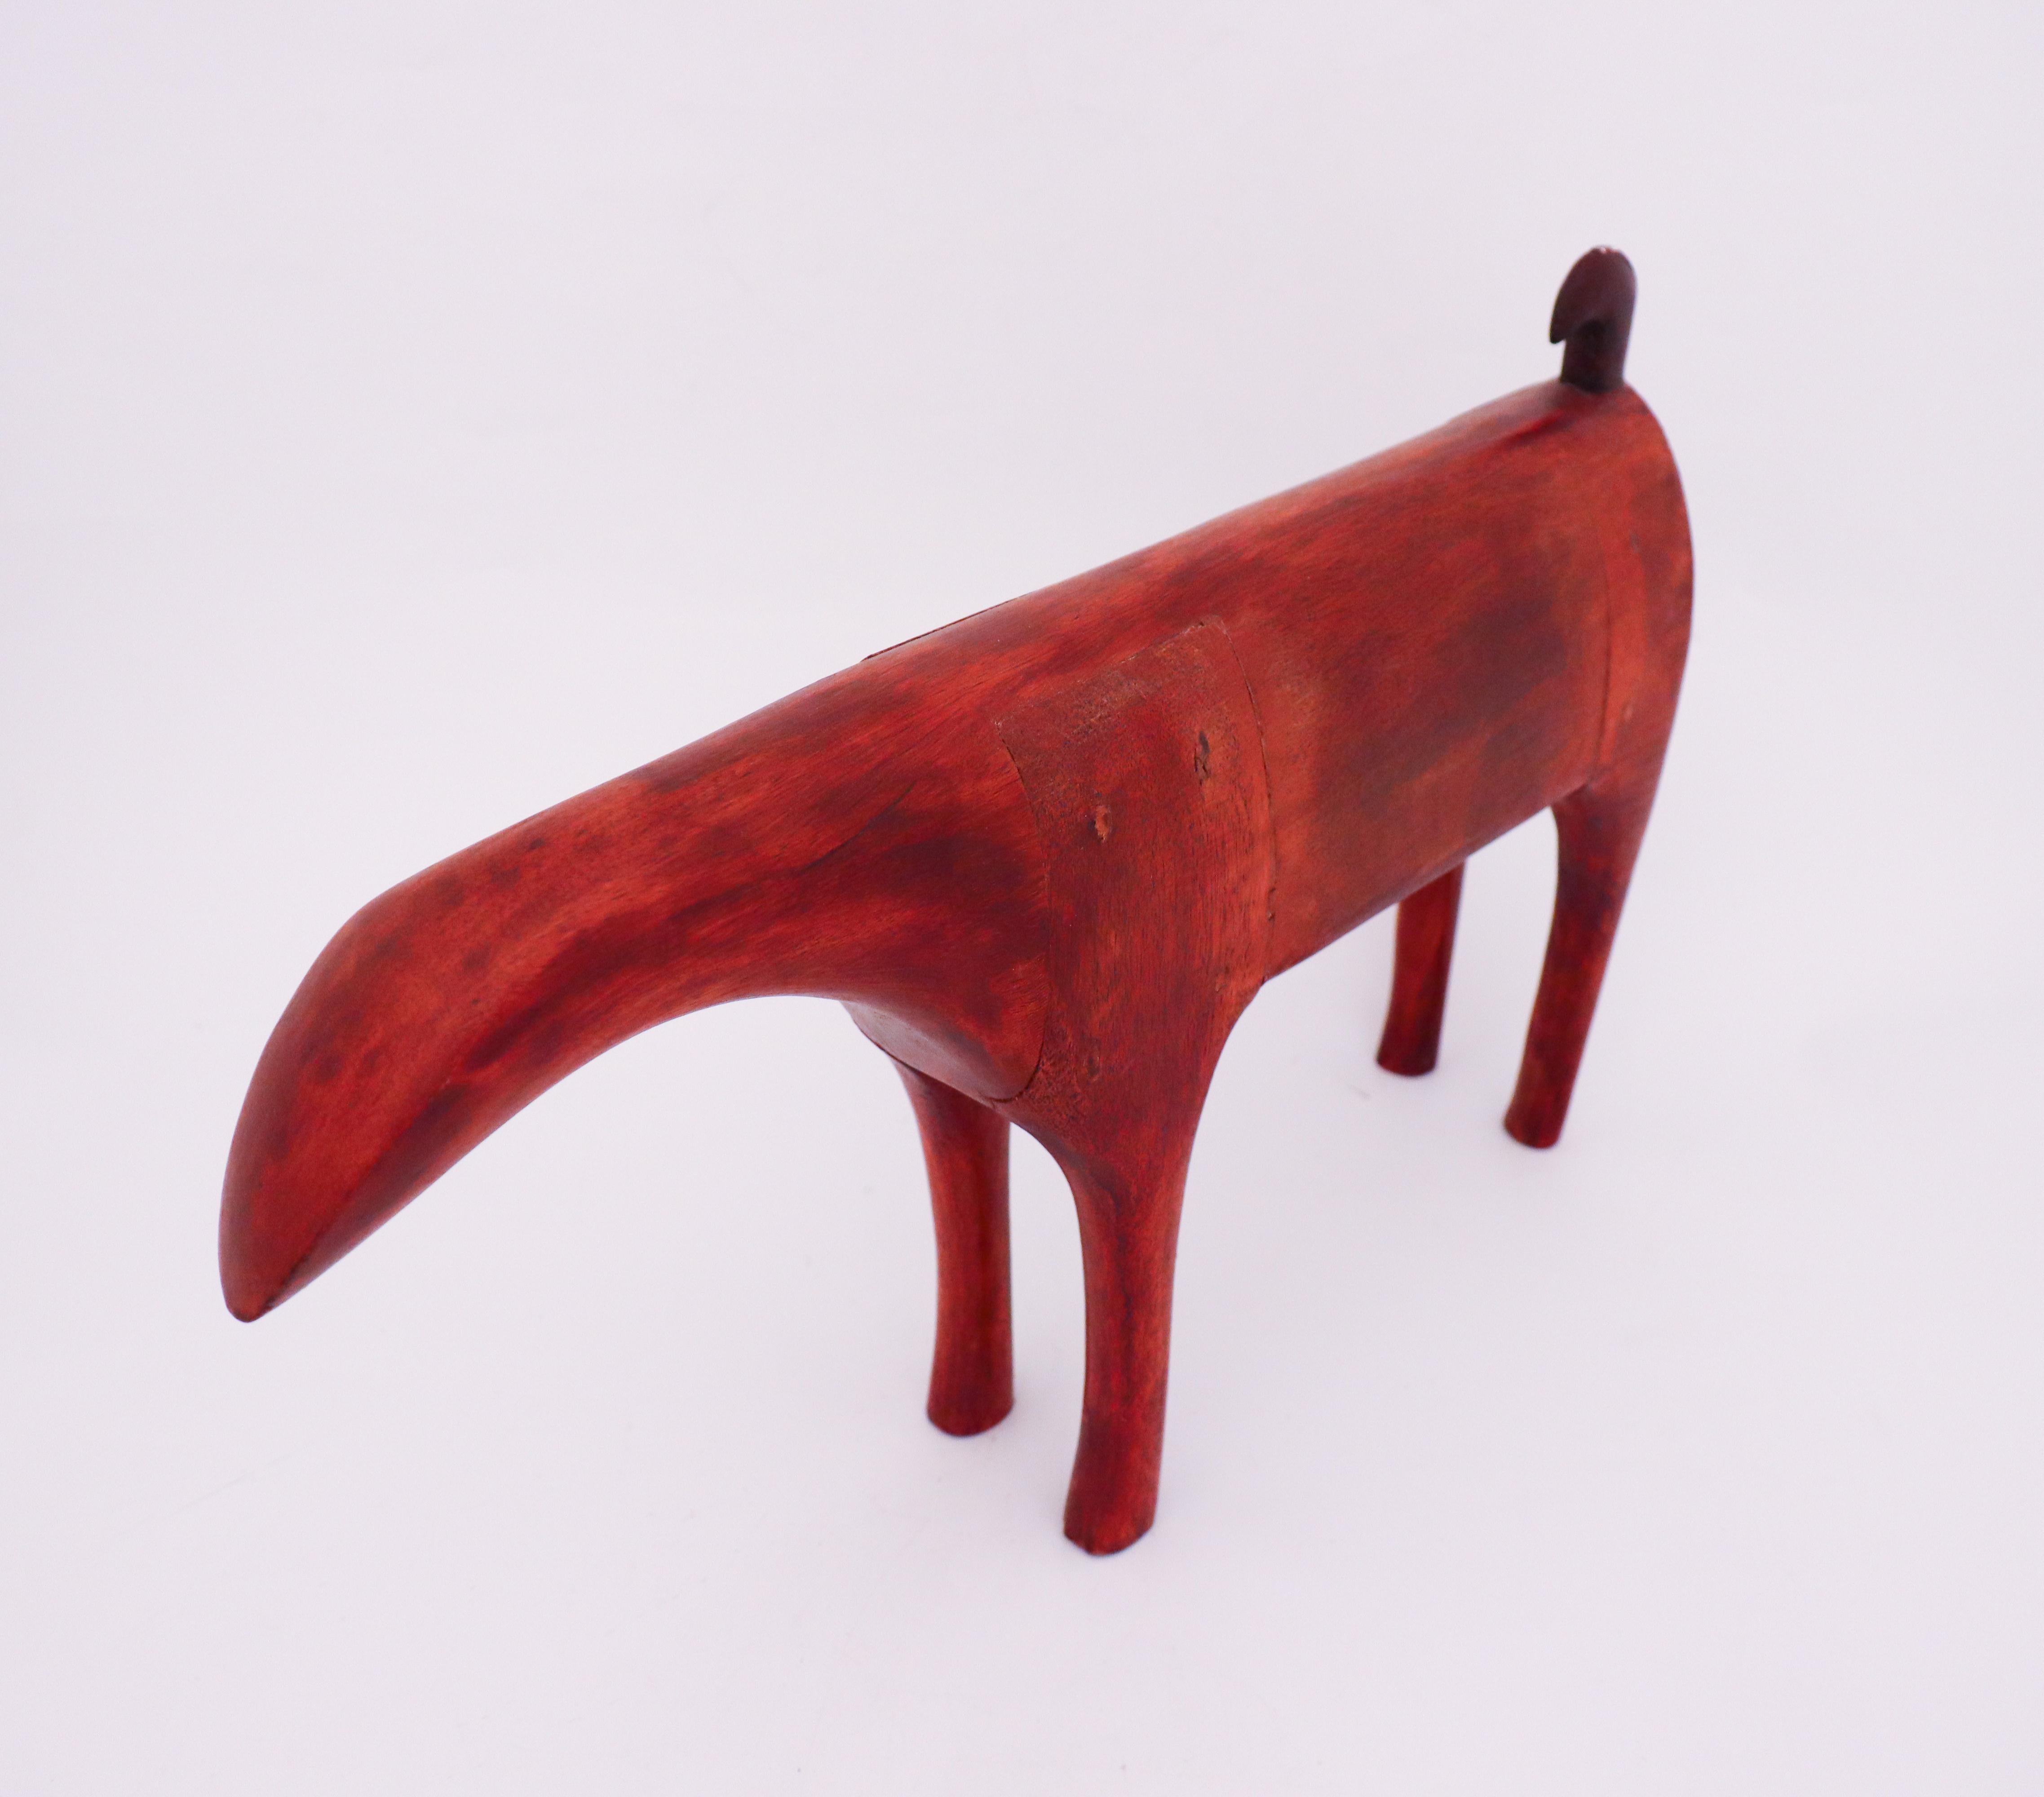 Glazed Red-Toned Wooden Vintage Abstract Animal Sculpture, Swedish Mid Century Handmade For Sale